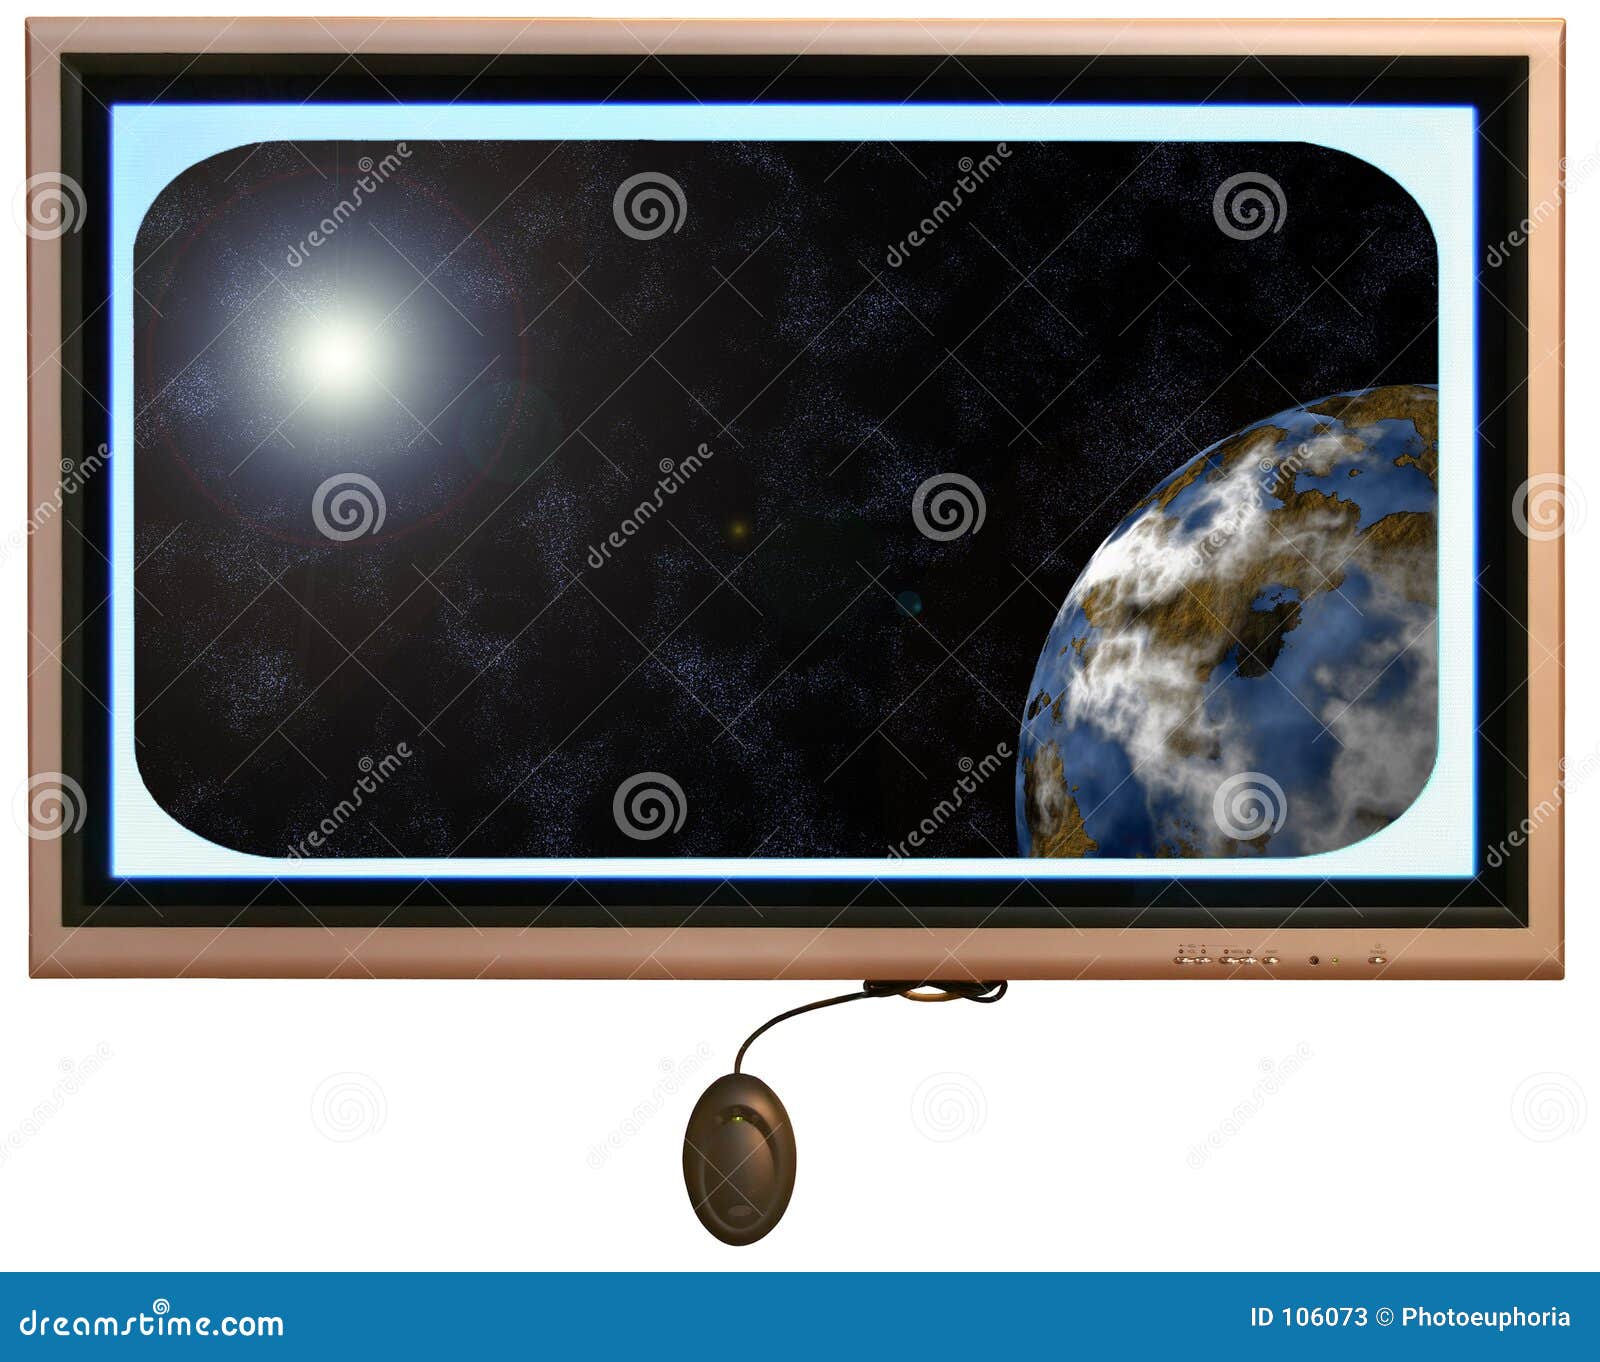 flatscreen monitor with sun and planet in display